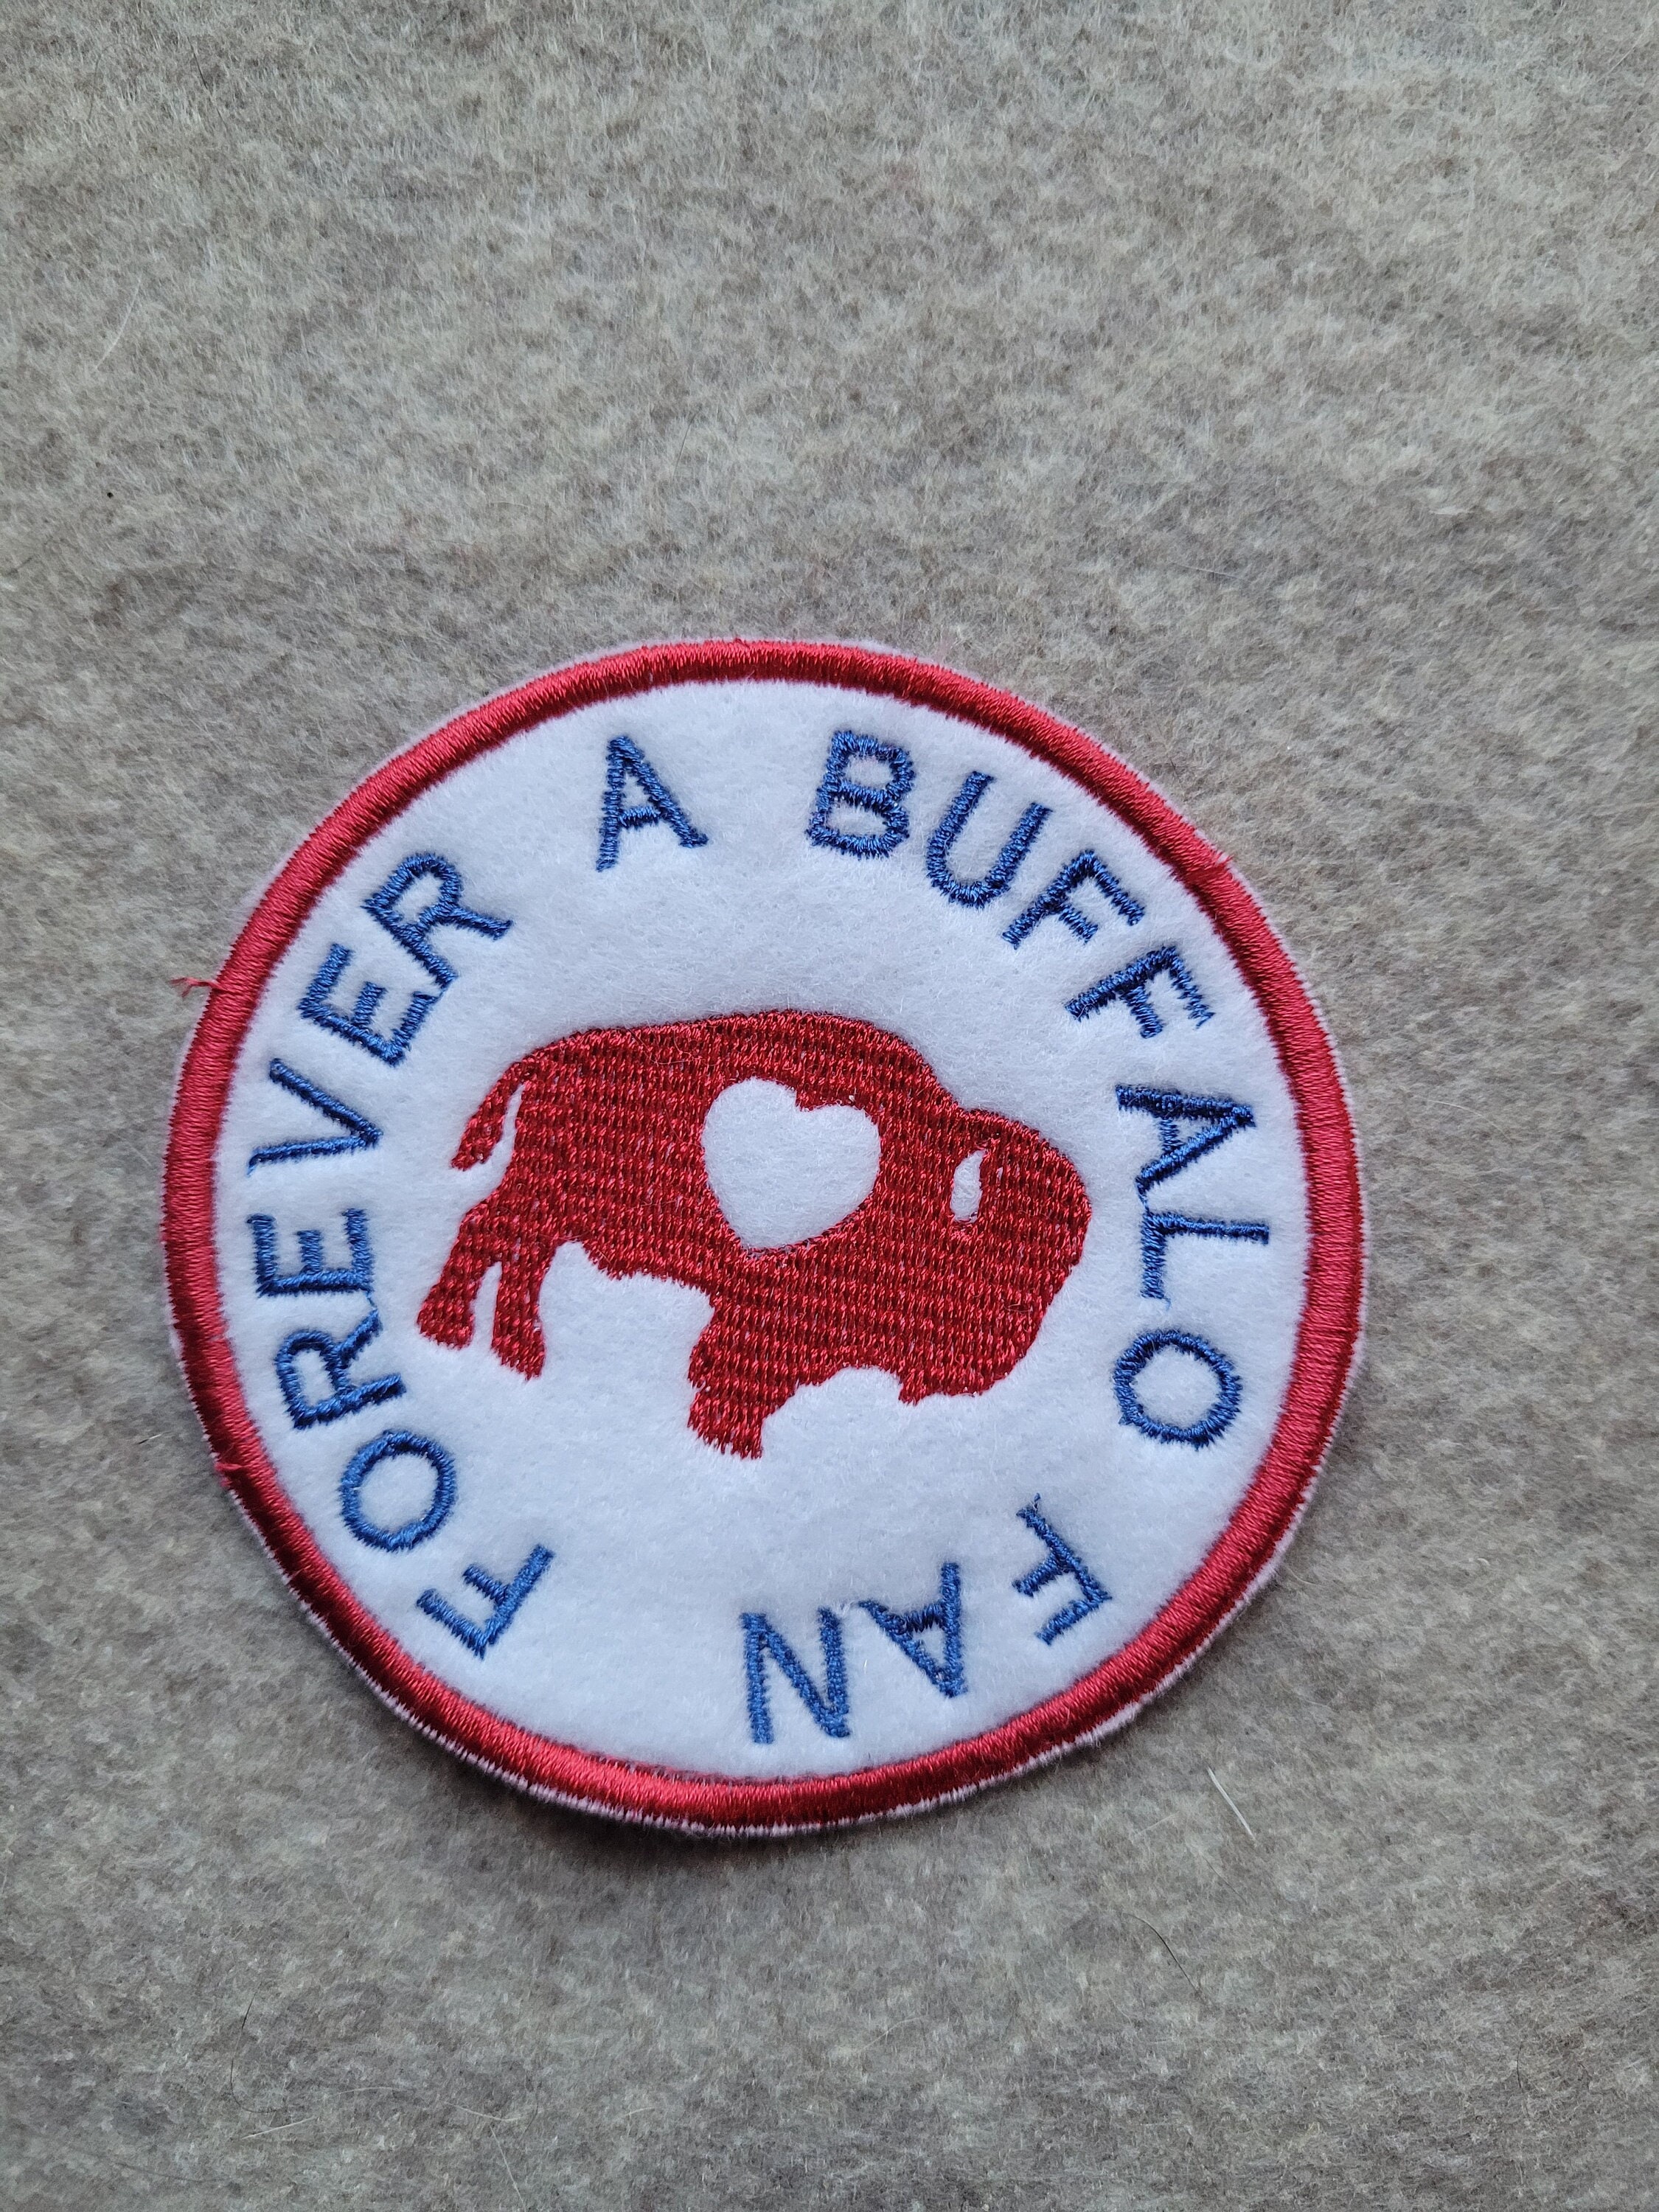 43. Buffalo Football Forever a Fan Patch 2 Sizes Available Iron On 